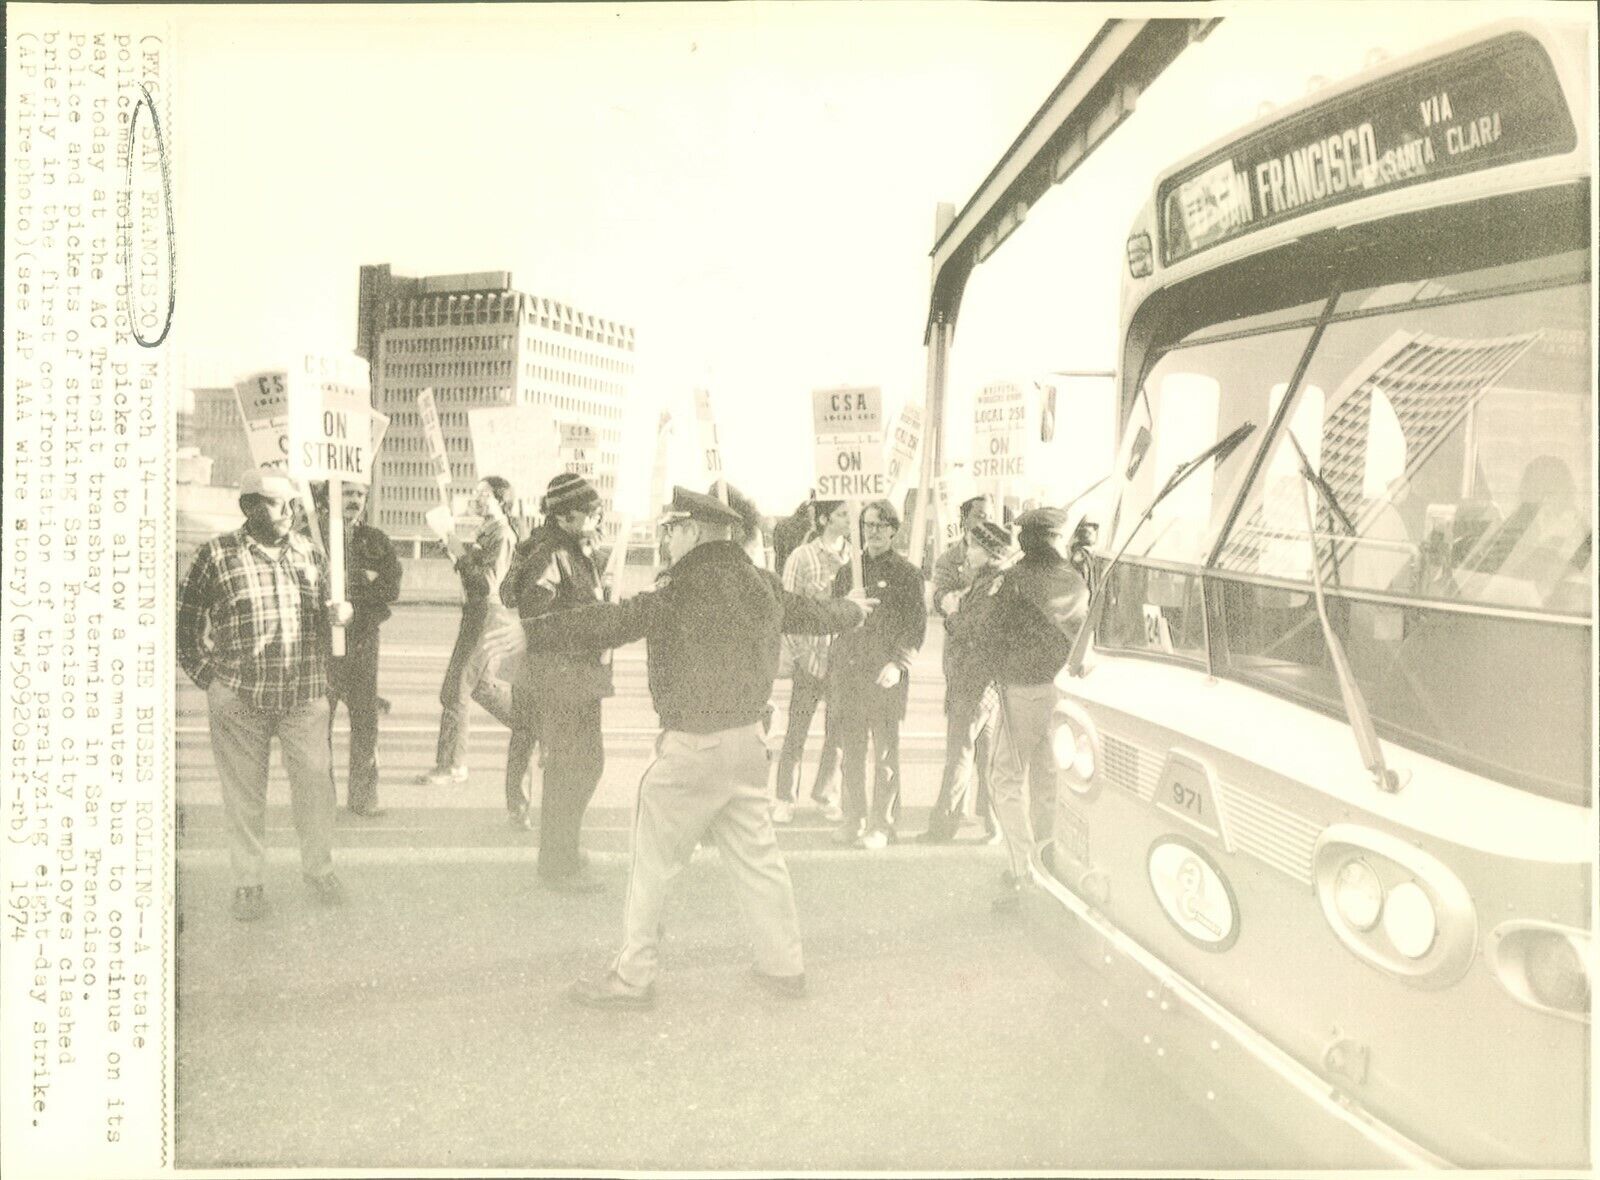 LG893 1974 Wire Photo KEEPING THE BUSES ROLLING San Francisco City Worker Strike